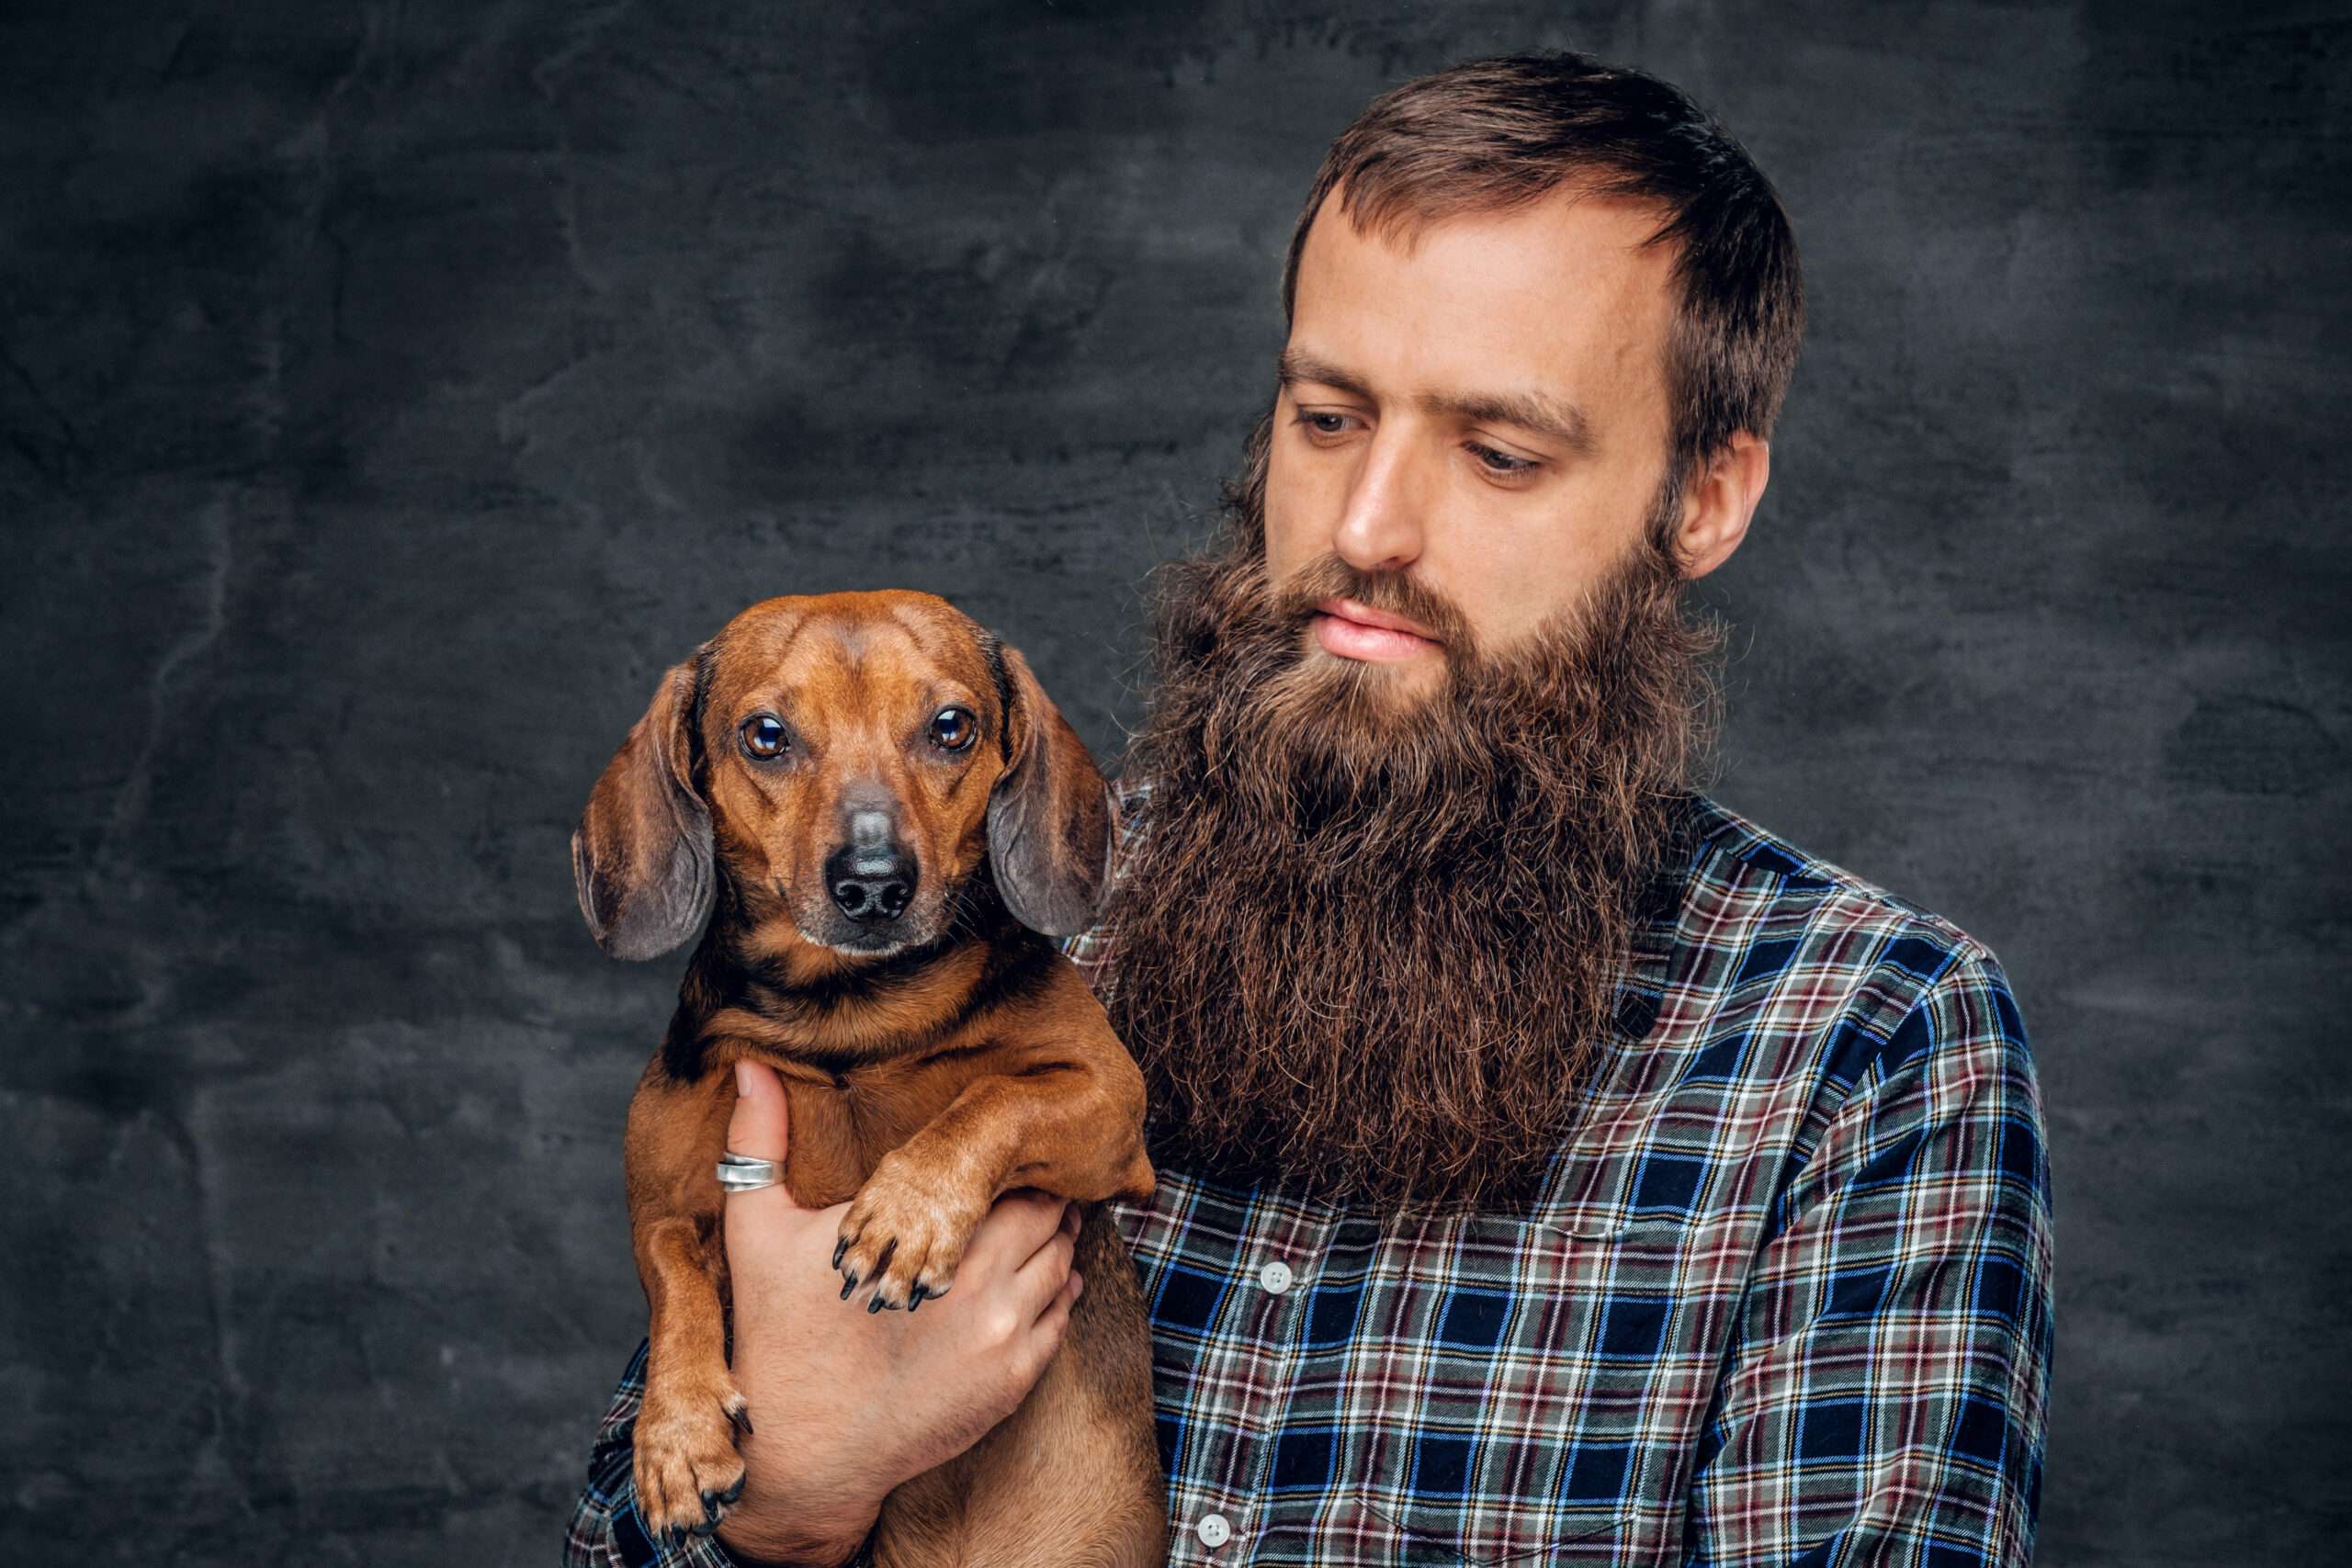 Donations - A bearded man holding a smooth haired dachshund